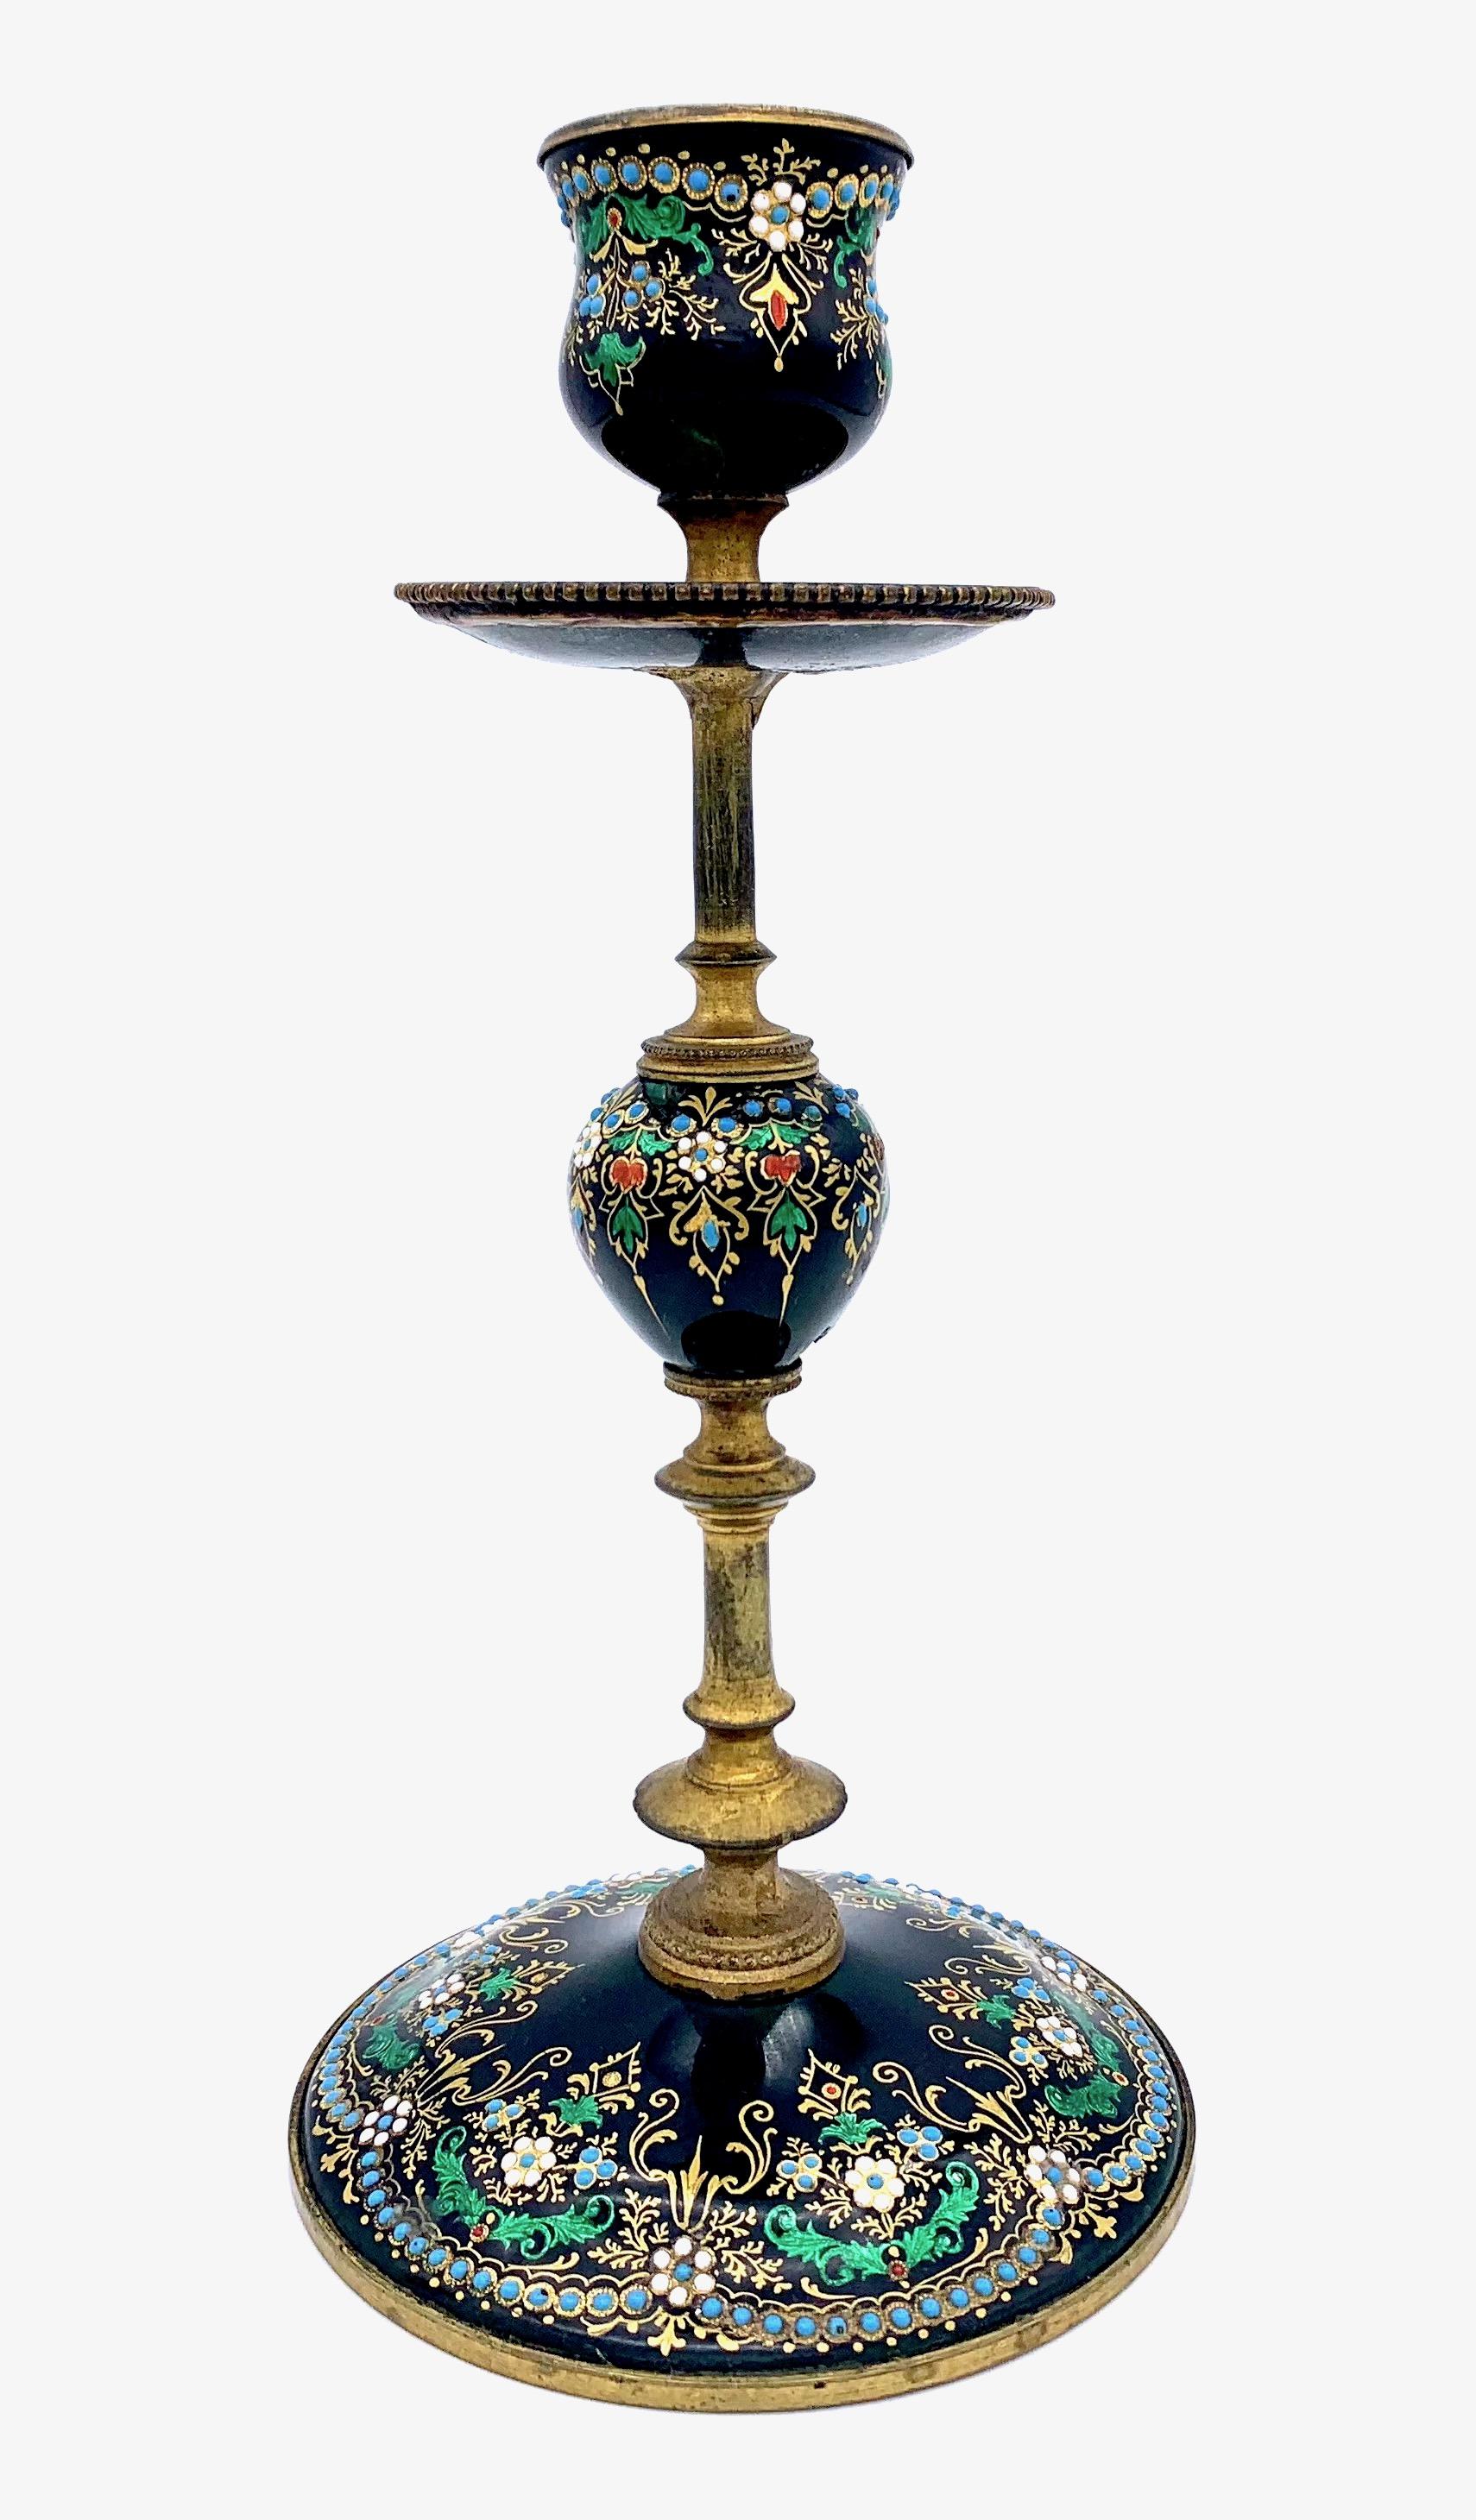 This beautifully enamelled set comprising an inkwell and two candlesticks will cheer up any room.
A fine example of the wonderful enamel work executed in Bresse around 1870.
The mastery of fine enamelling has along tradition in Bourg - en - Bresse